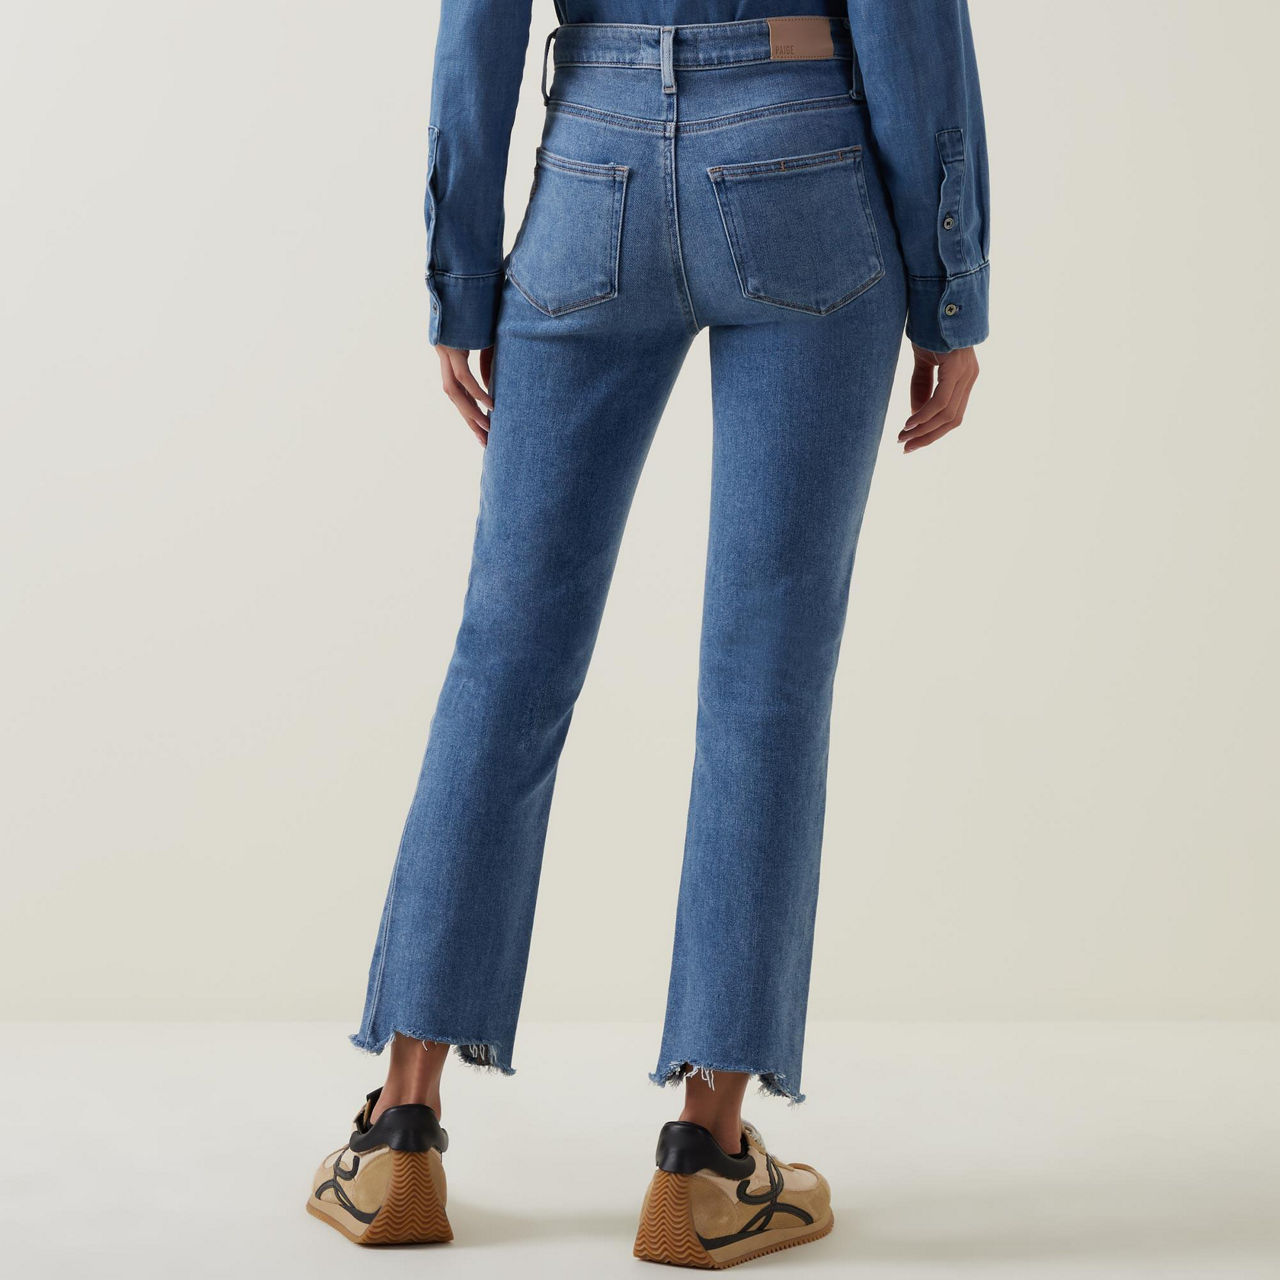 Paige Cindy Straight Leg Jeans Col: Sketchbook, Size: 30